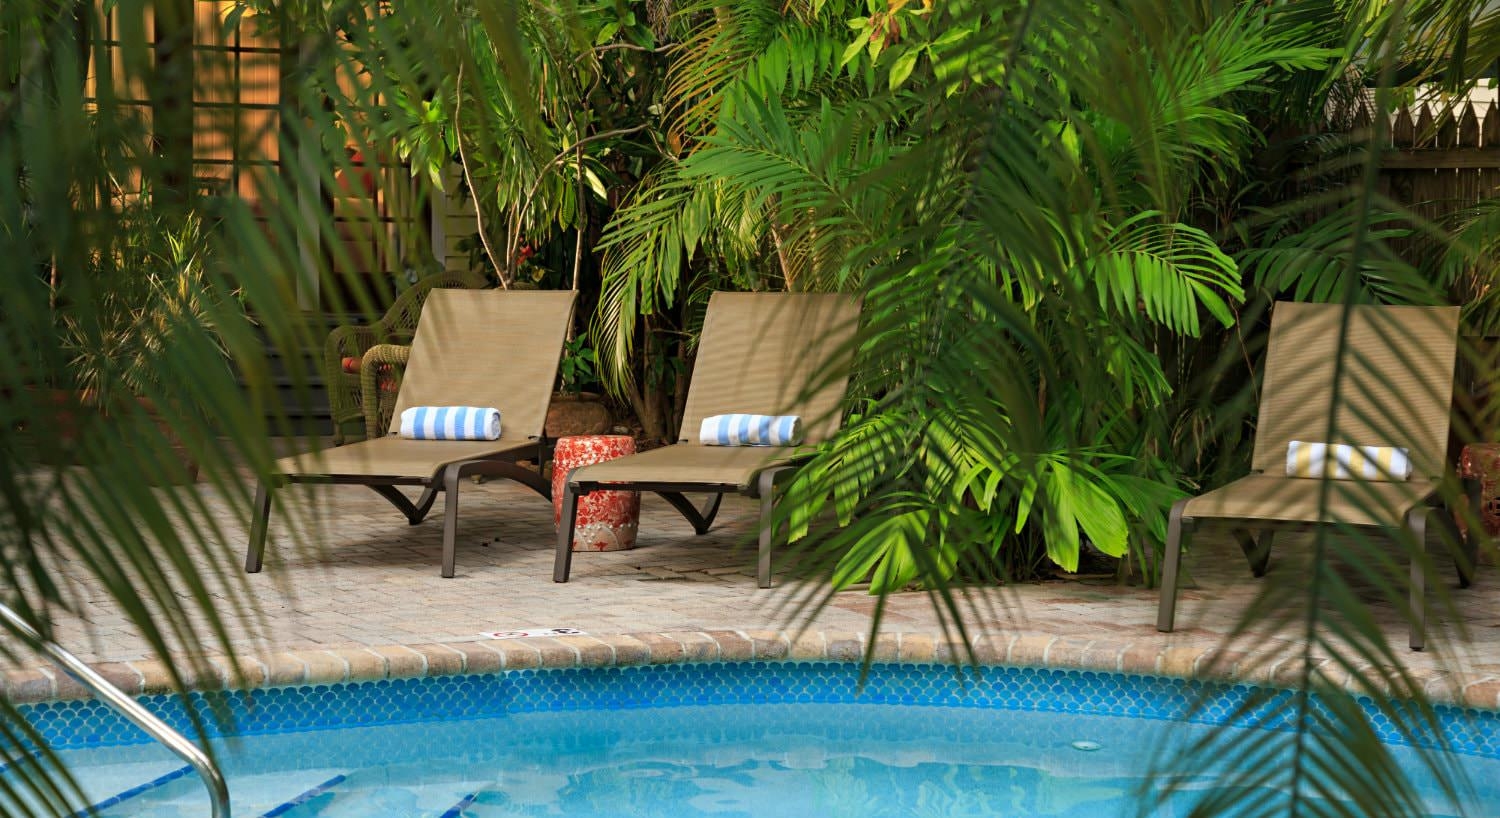 Circular pool with brown lounge chairs with striped towels surrounded by dense greenery